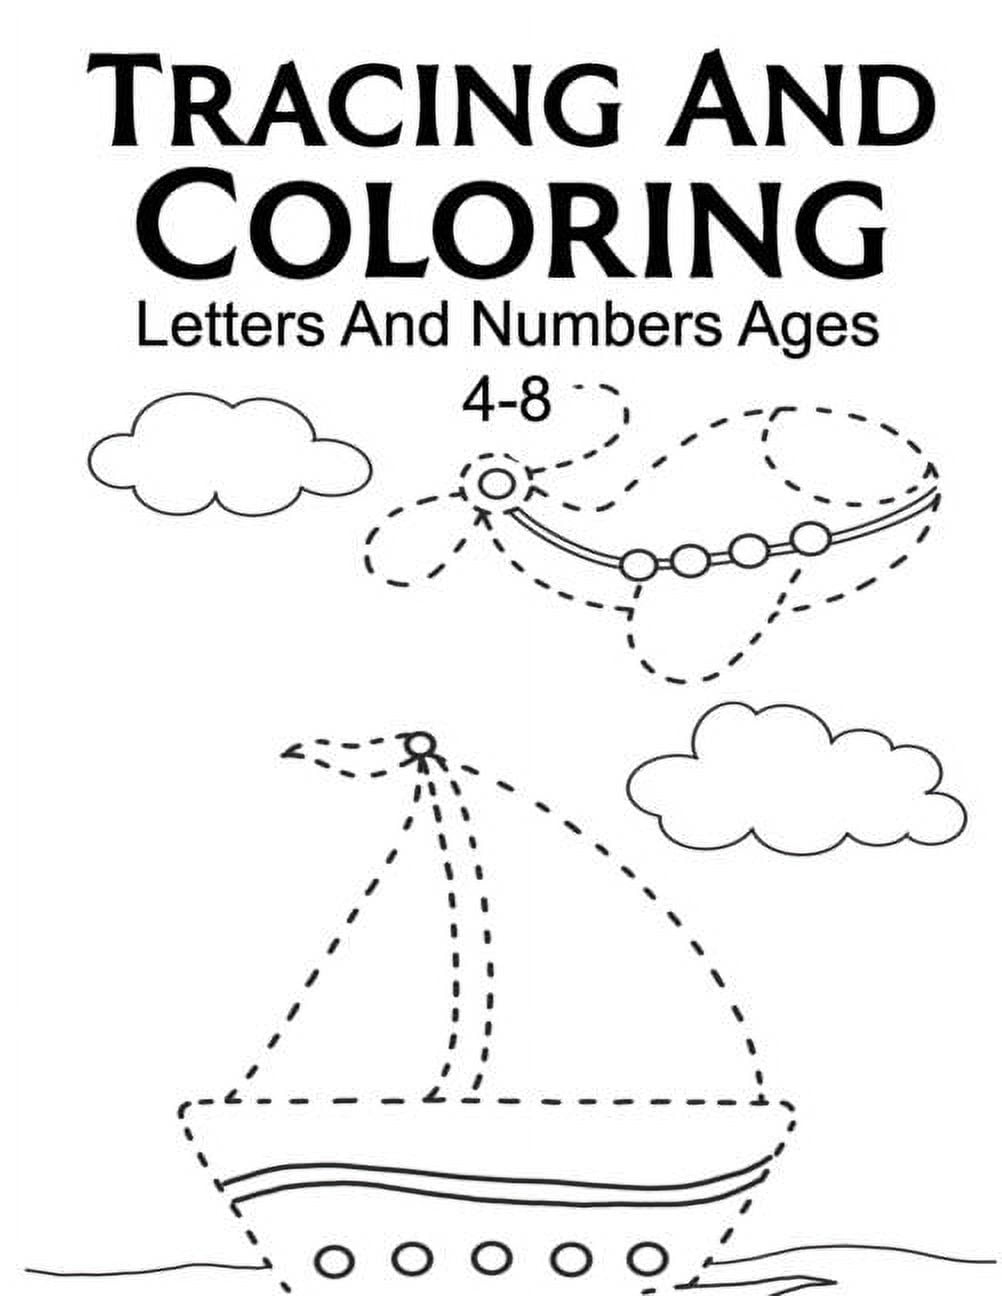 Tracing and coloring letters and numbers book ages